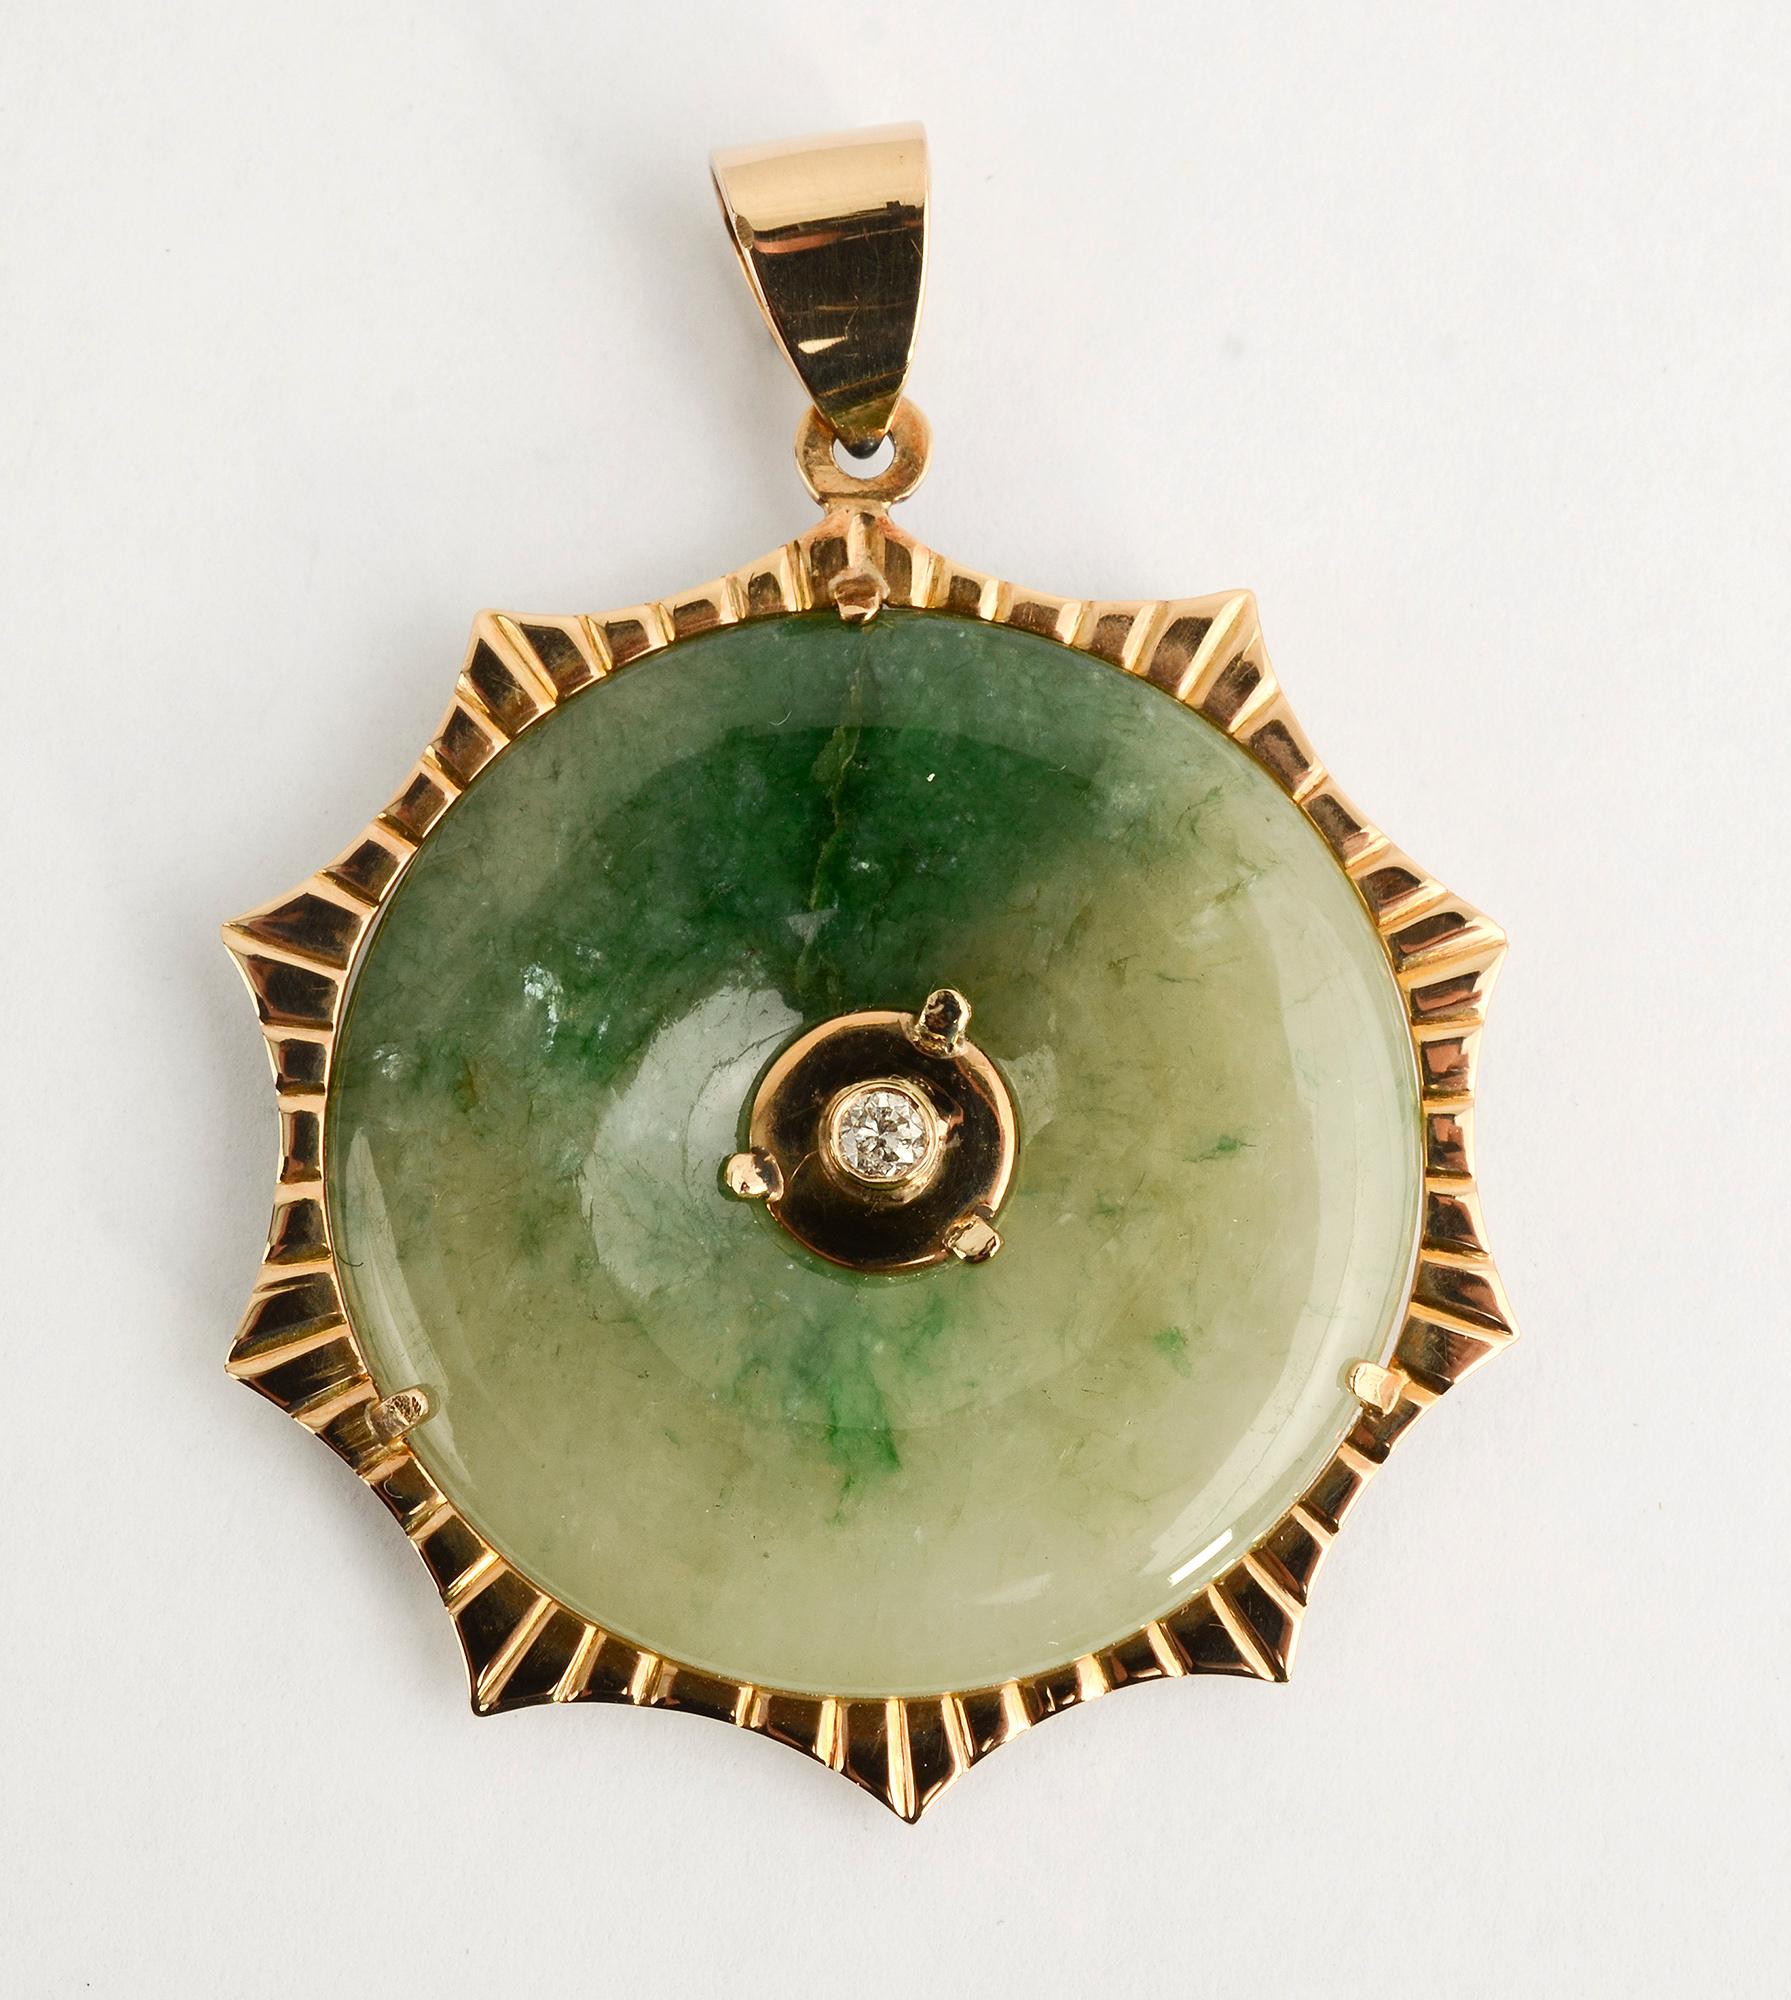 Lovely and unusual jade pendant centered with a diamond on each side. The diamonds are each approximately 1/5 carat. The jade is encircled by a gold frame with a slight sunburst design.
The pendant measures 1 3/4 inches in diameter. By